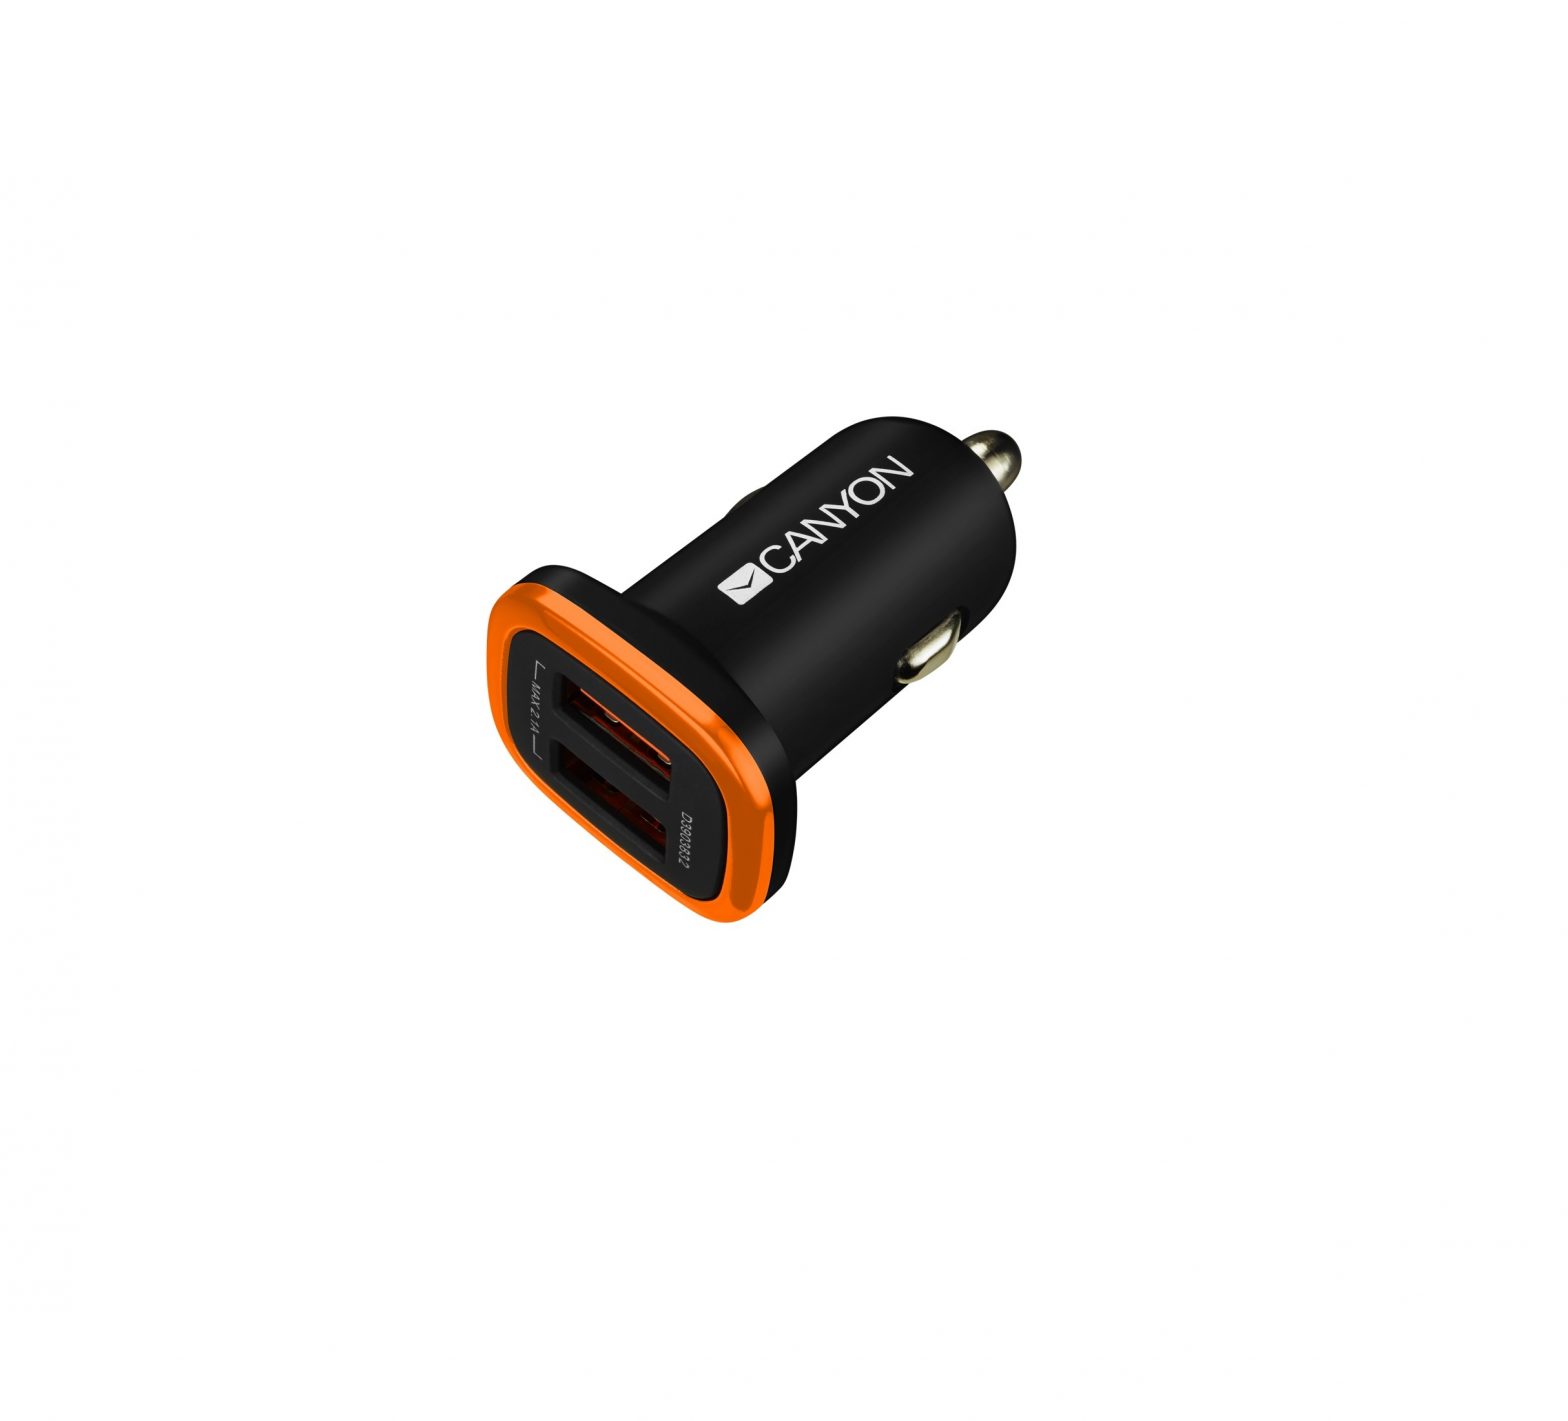 CANYON Universal Car charger 2.1A User Guide